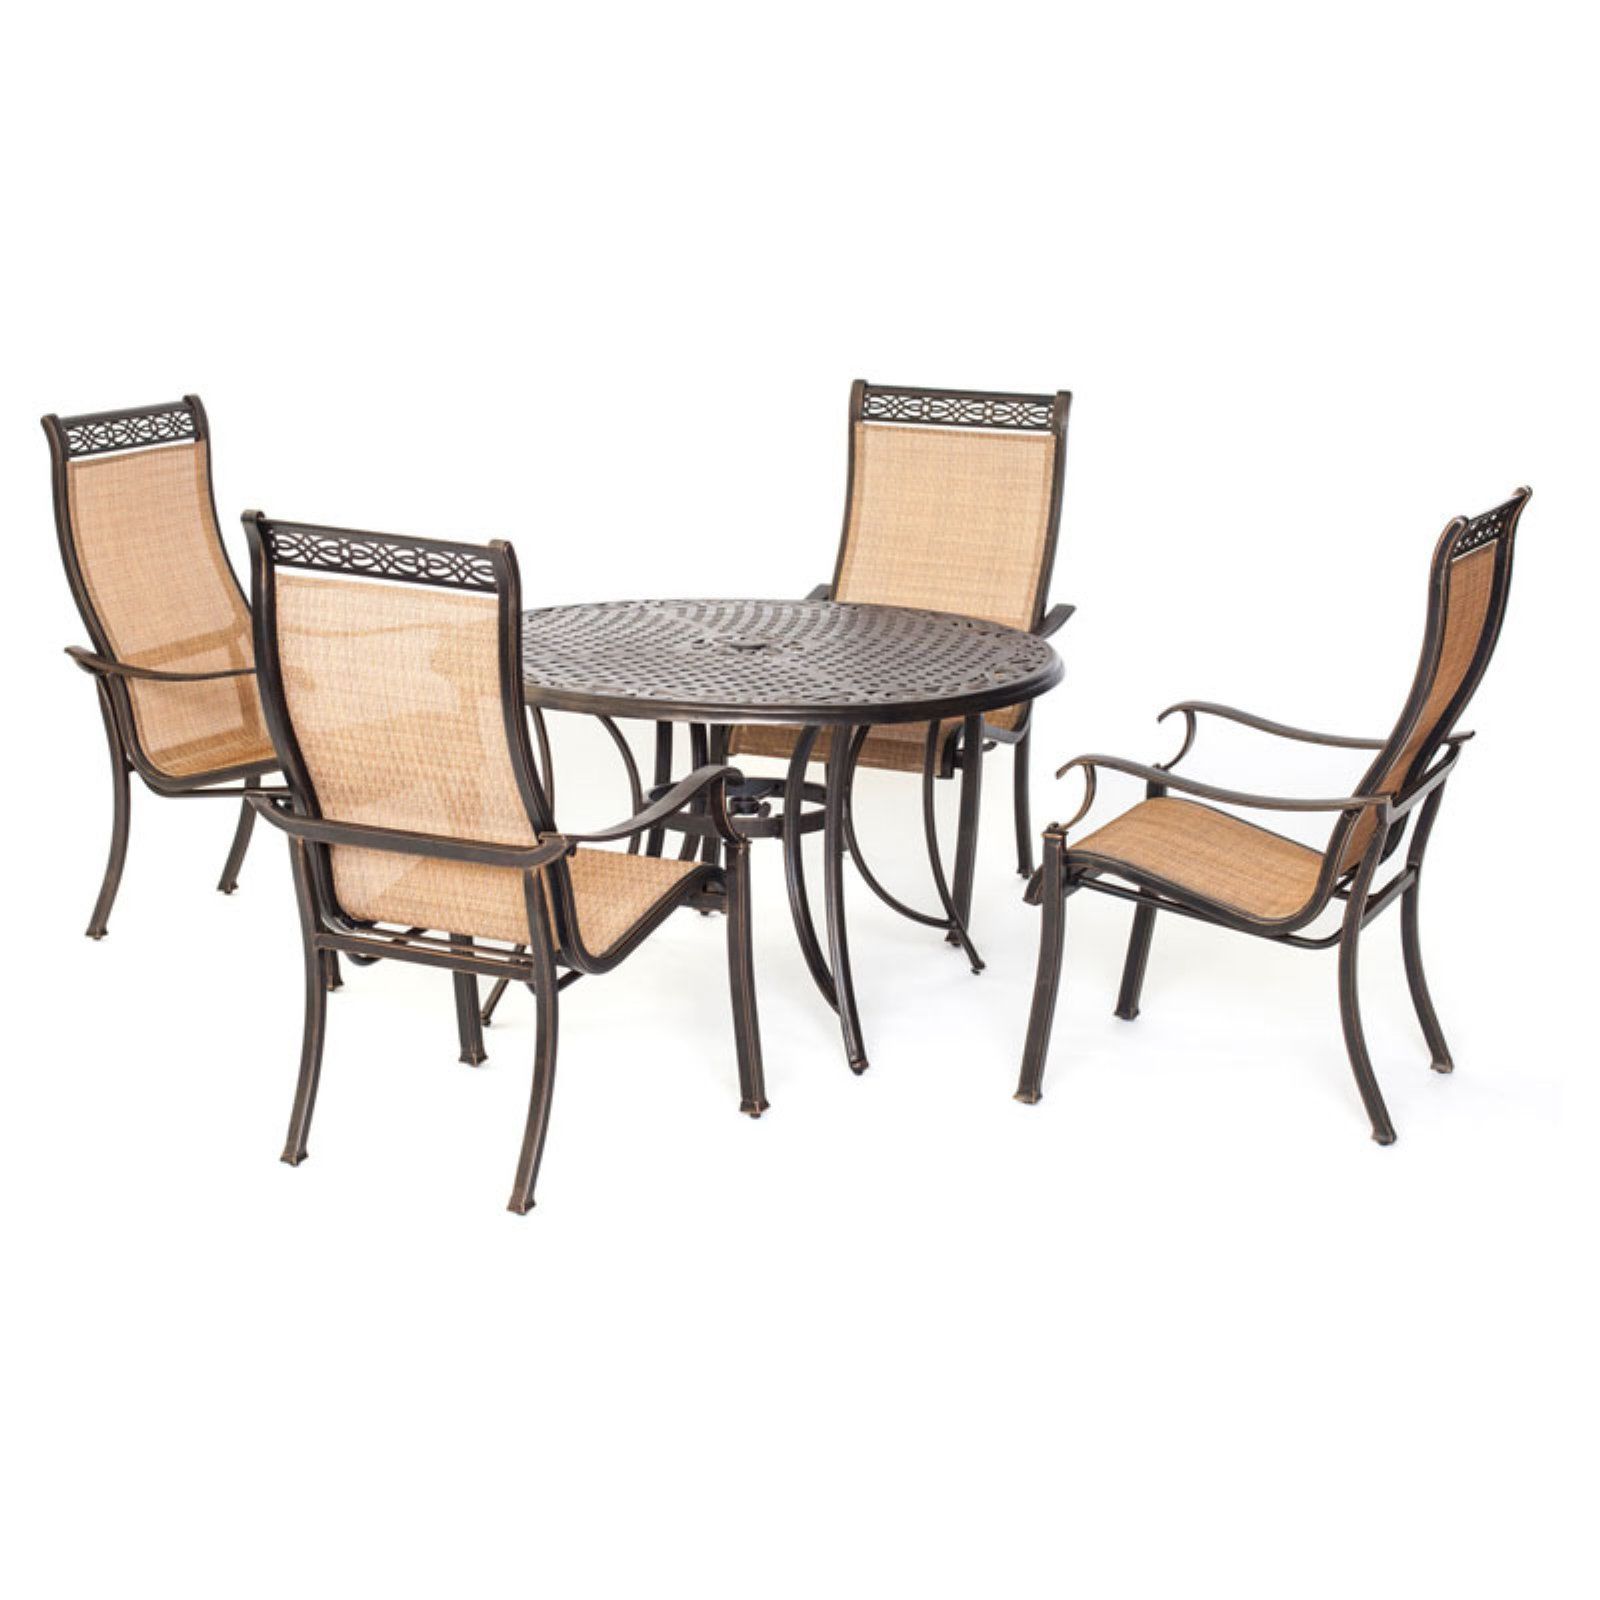 Hanover Manor Aluminum 5 Piece Round Patio Dining Set – Walmart With Well Liked Round 5 Piece Outdoor Patio Dining Sets (View 11 of 15)